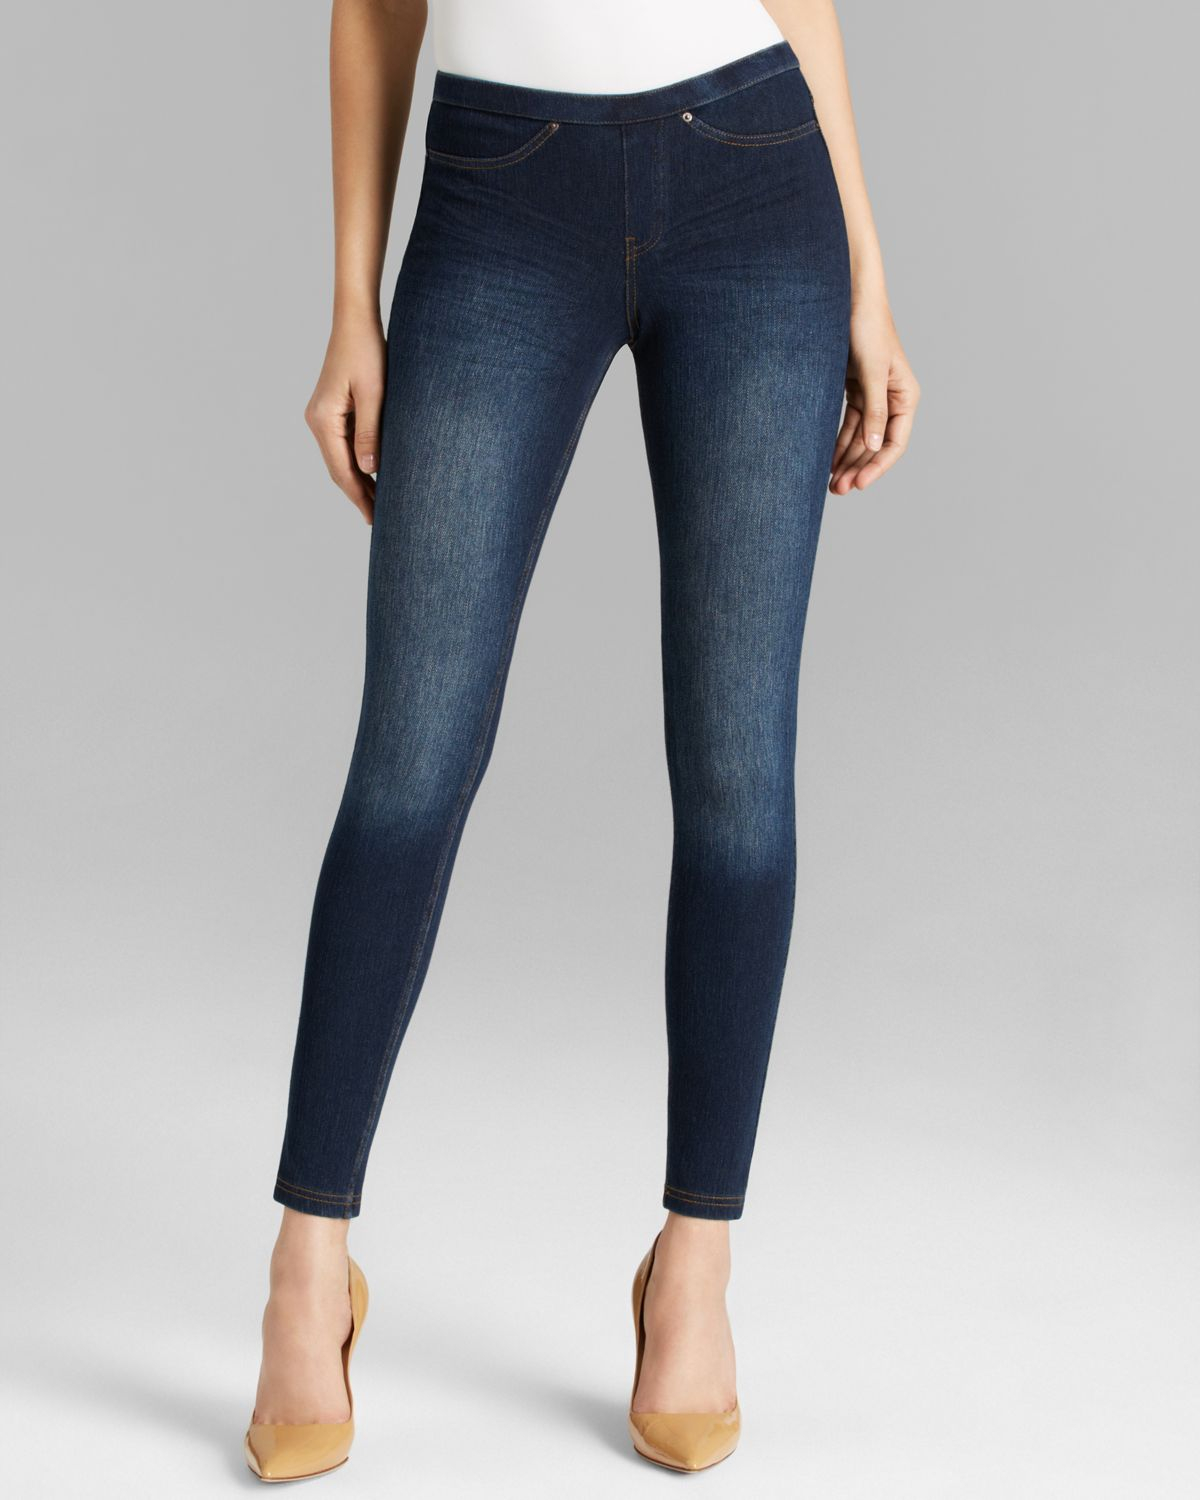 Blue Jean Leggings For Sale  International Society of Precision Agriculture